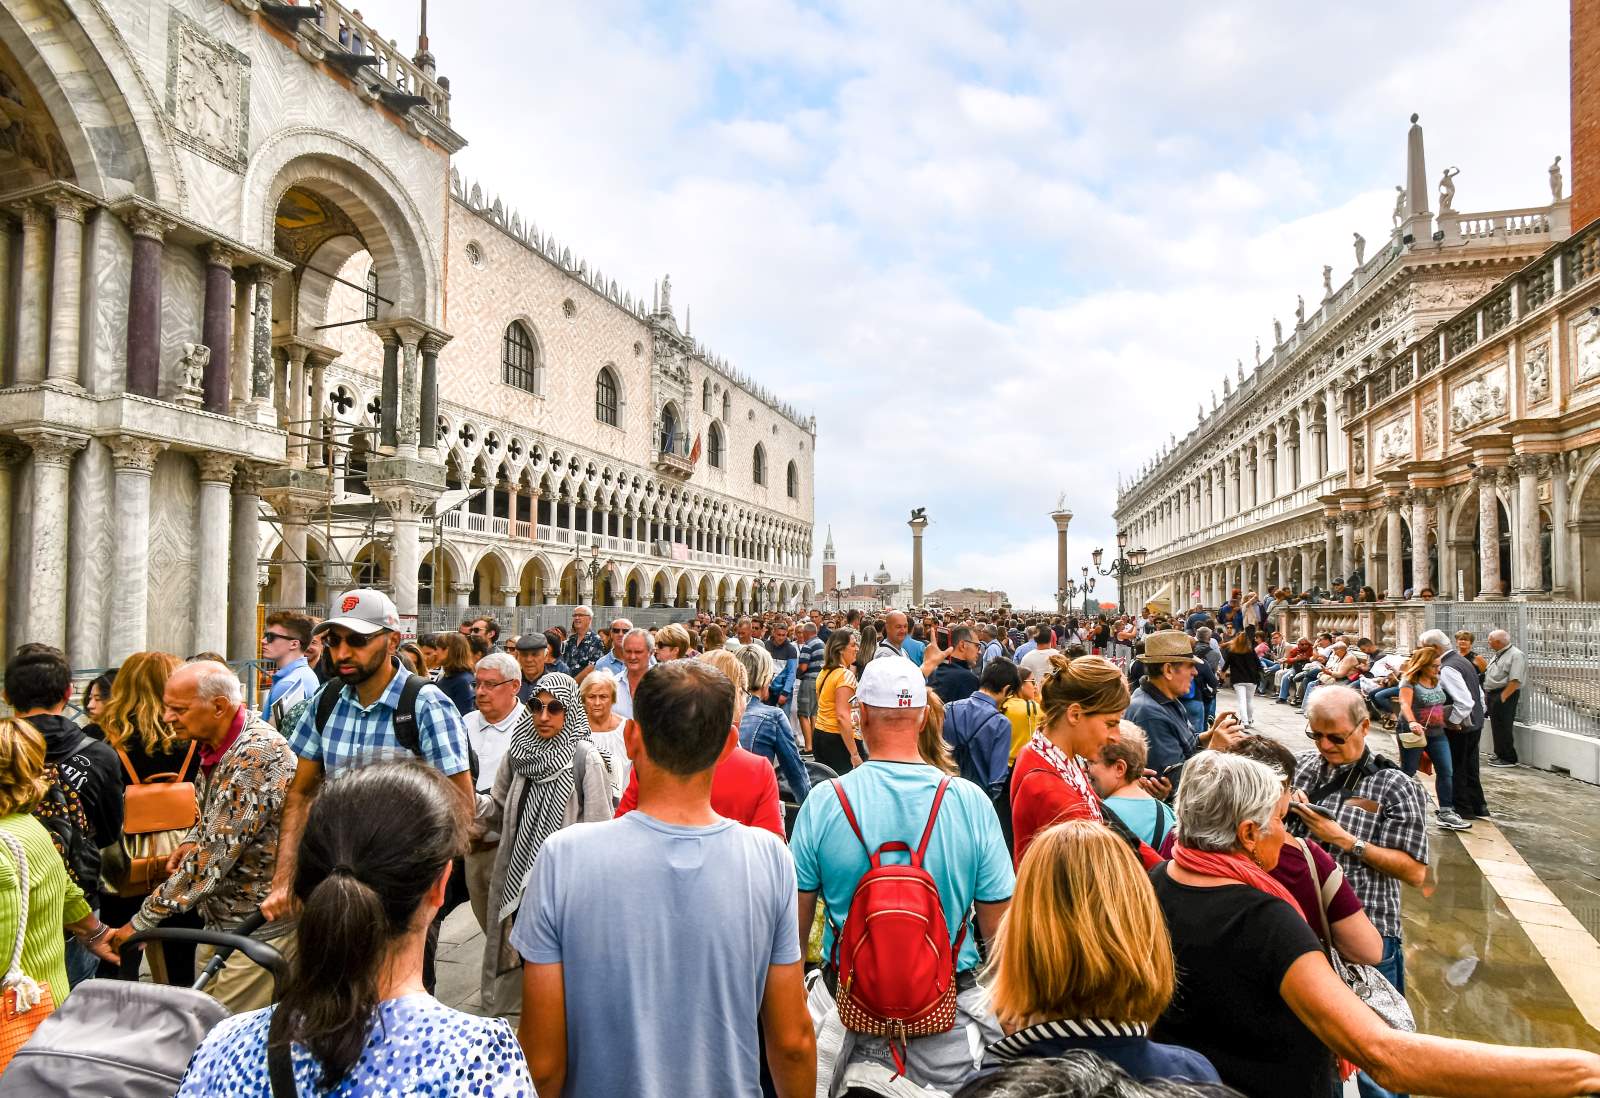 Image Credit: Shutterstock / Kirk Fisher <p><span>“The only way [forward] is to repopulate the city – we have 49,000 inhabitants and there are more beds for tourists than residents,” he said. “Let’s try to make it possible for people to live here. Every house that’s lived in is a house taken away from tourism.”</span></p>